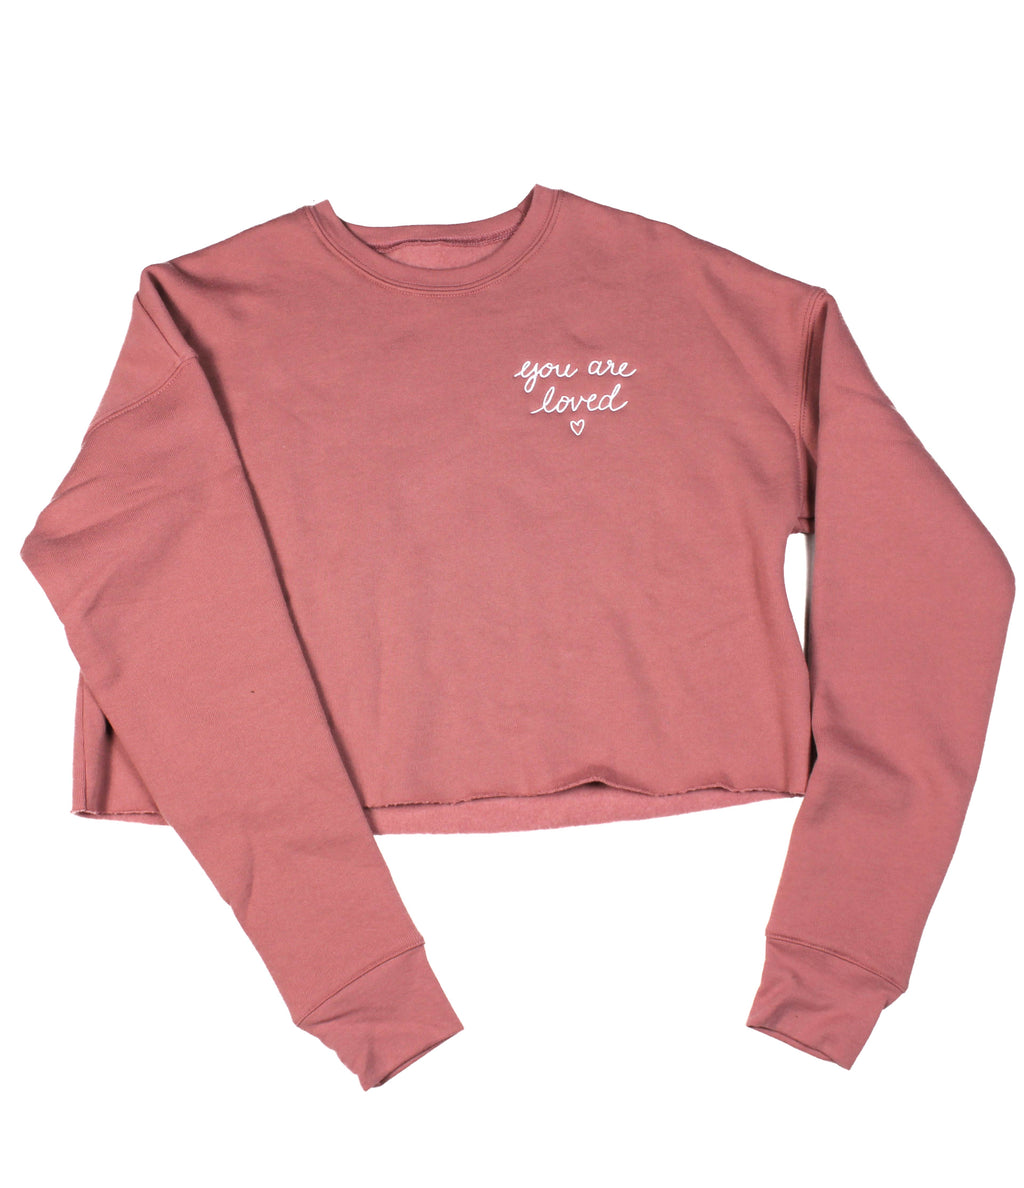 YOU ARE LOVED EMBROIDERED SCRIPT MAUVE WOMEN'S CROPPED CREW FLEECE